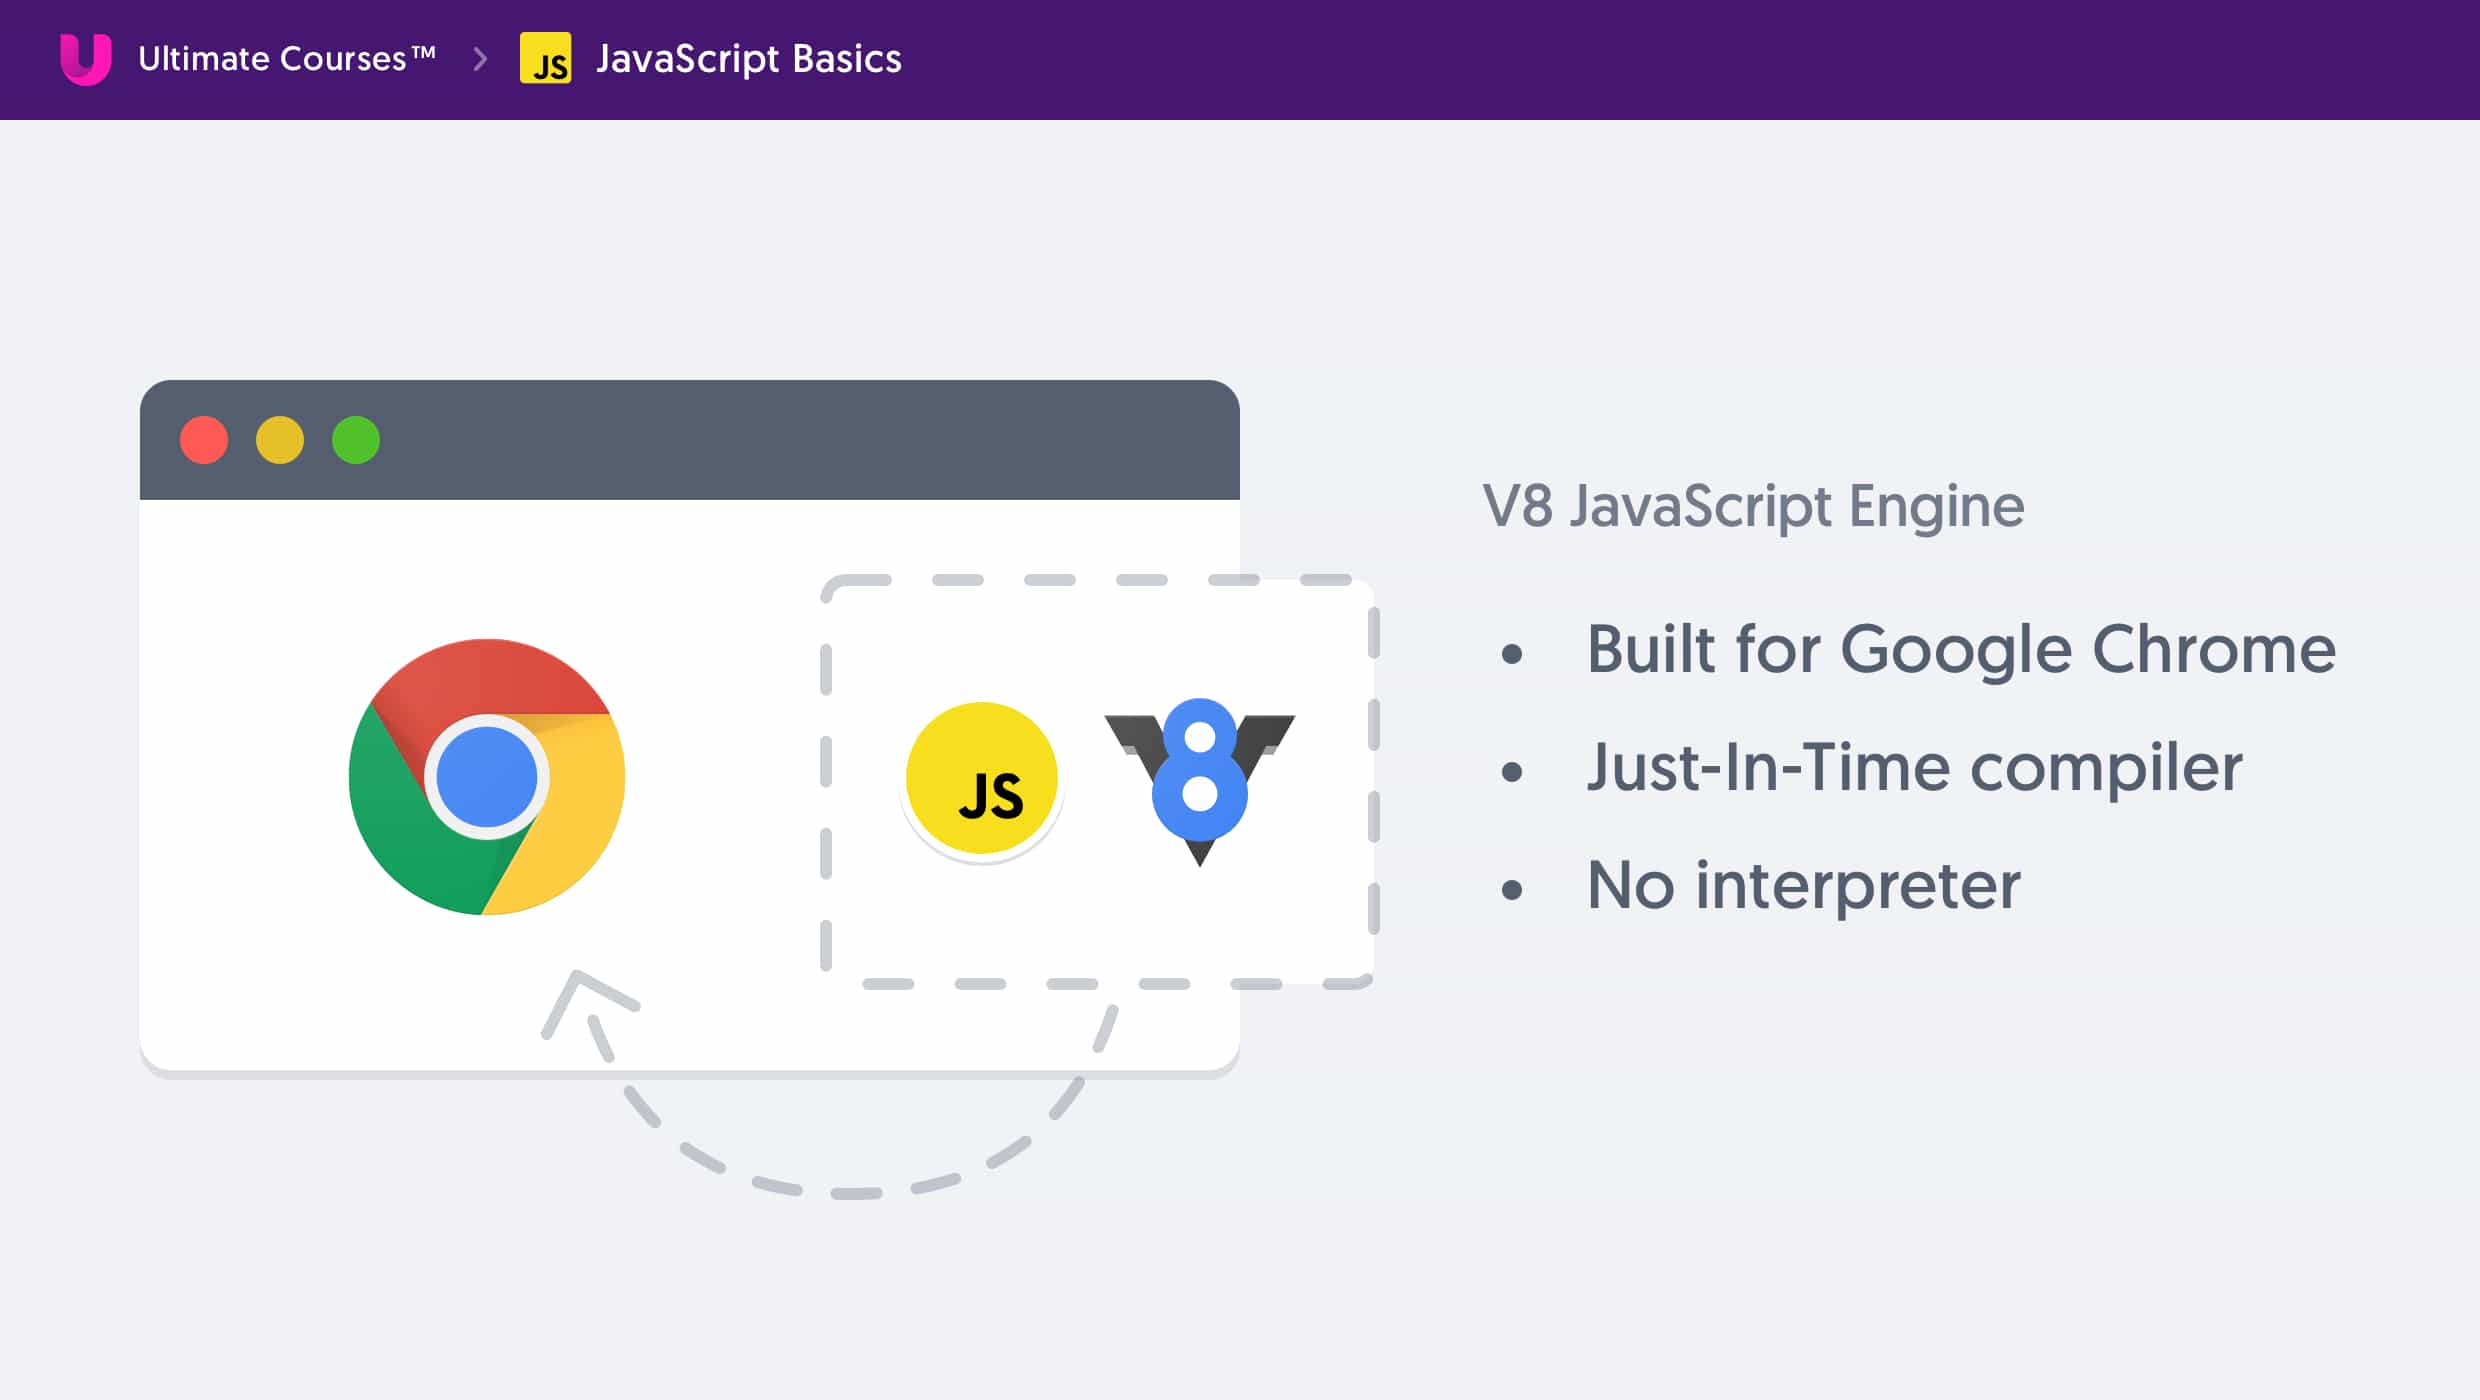 Showing how Google Chrome's JavaScript engine, V8 fits into a browser